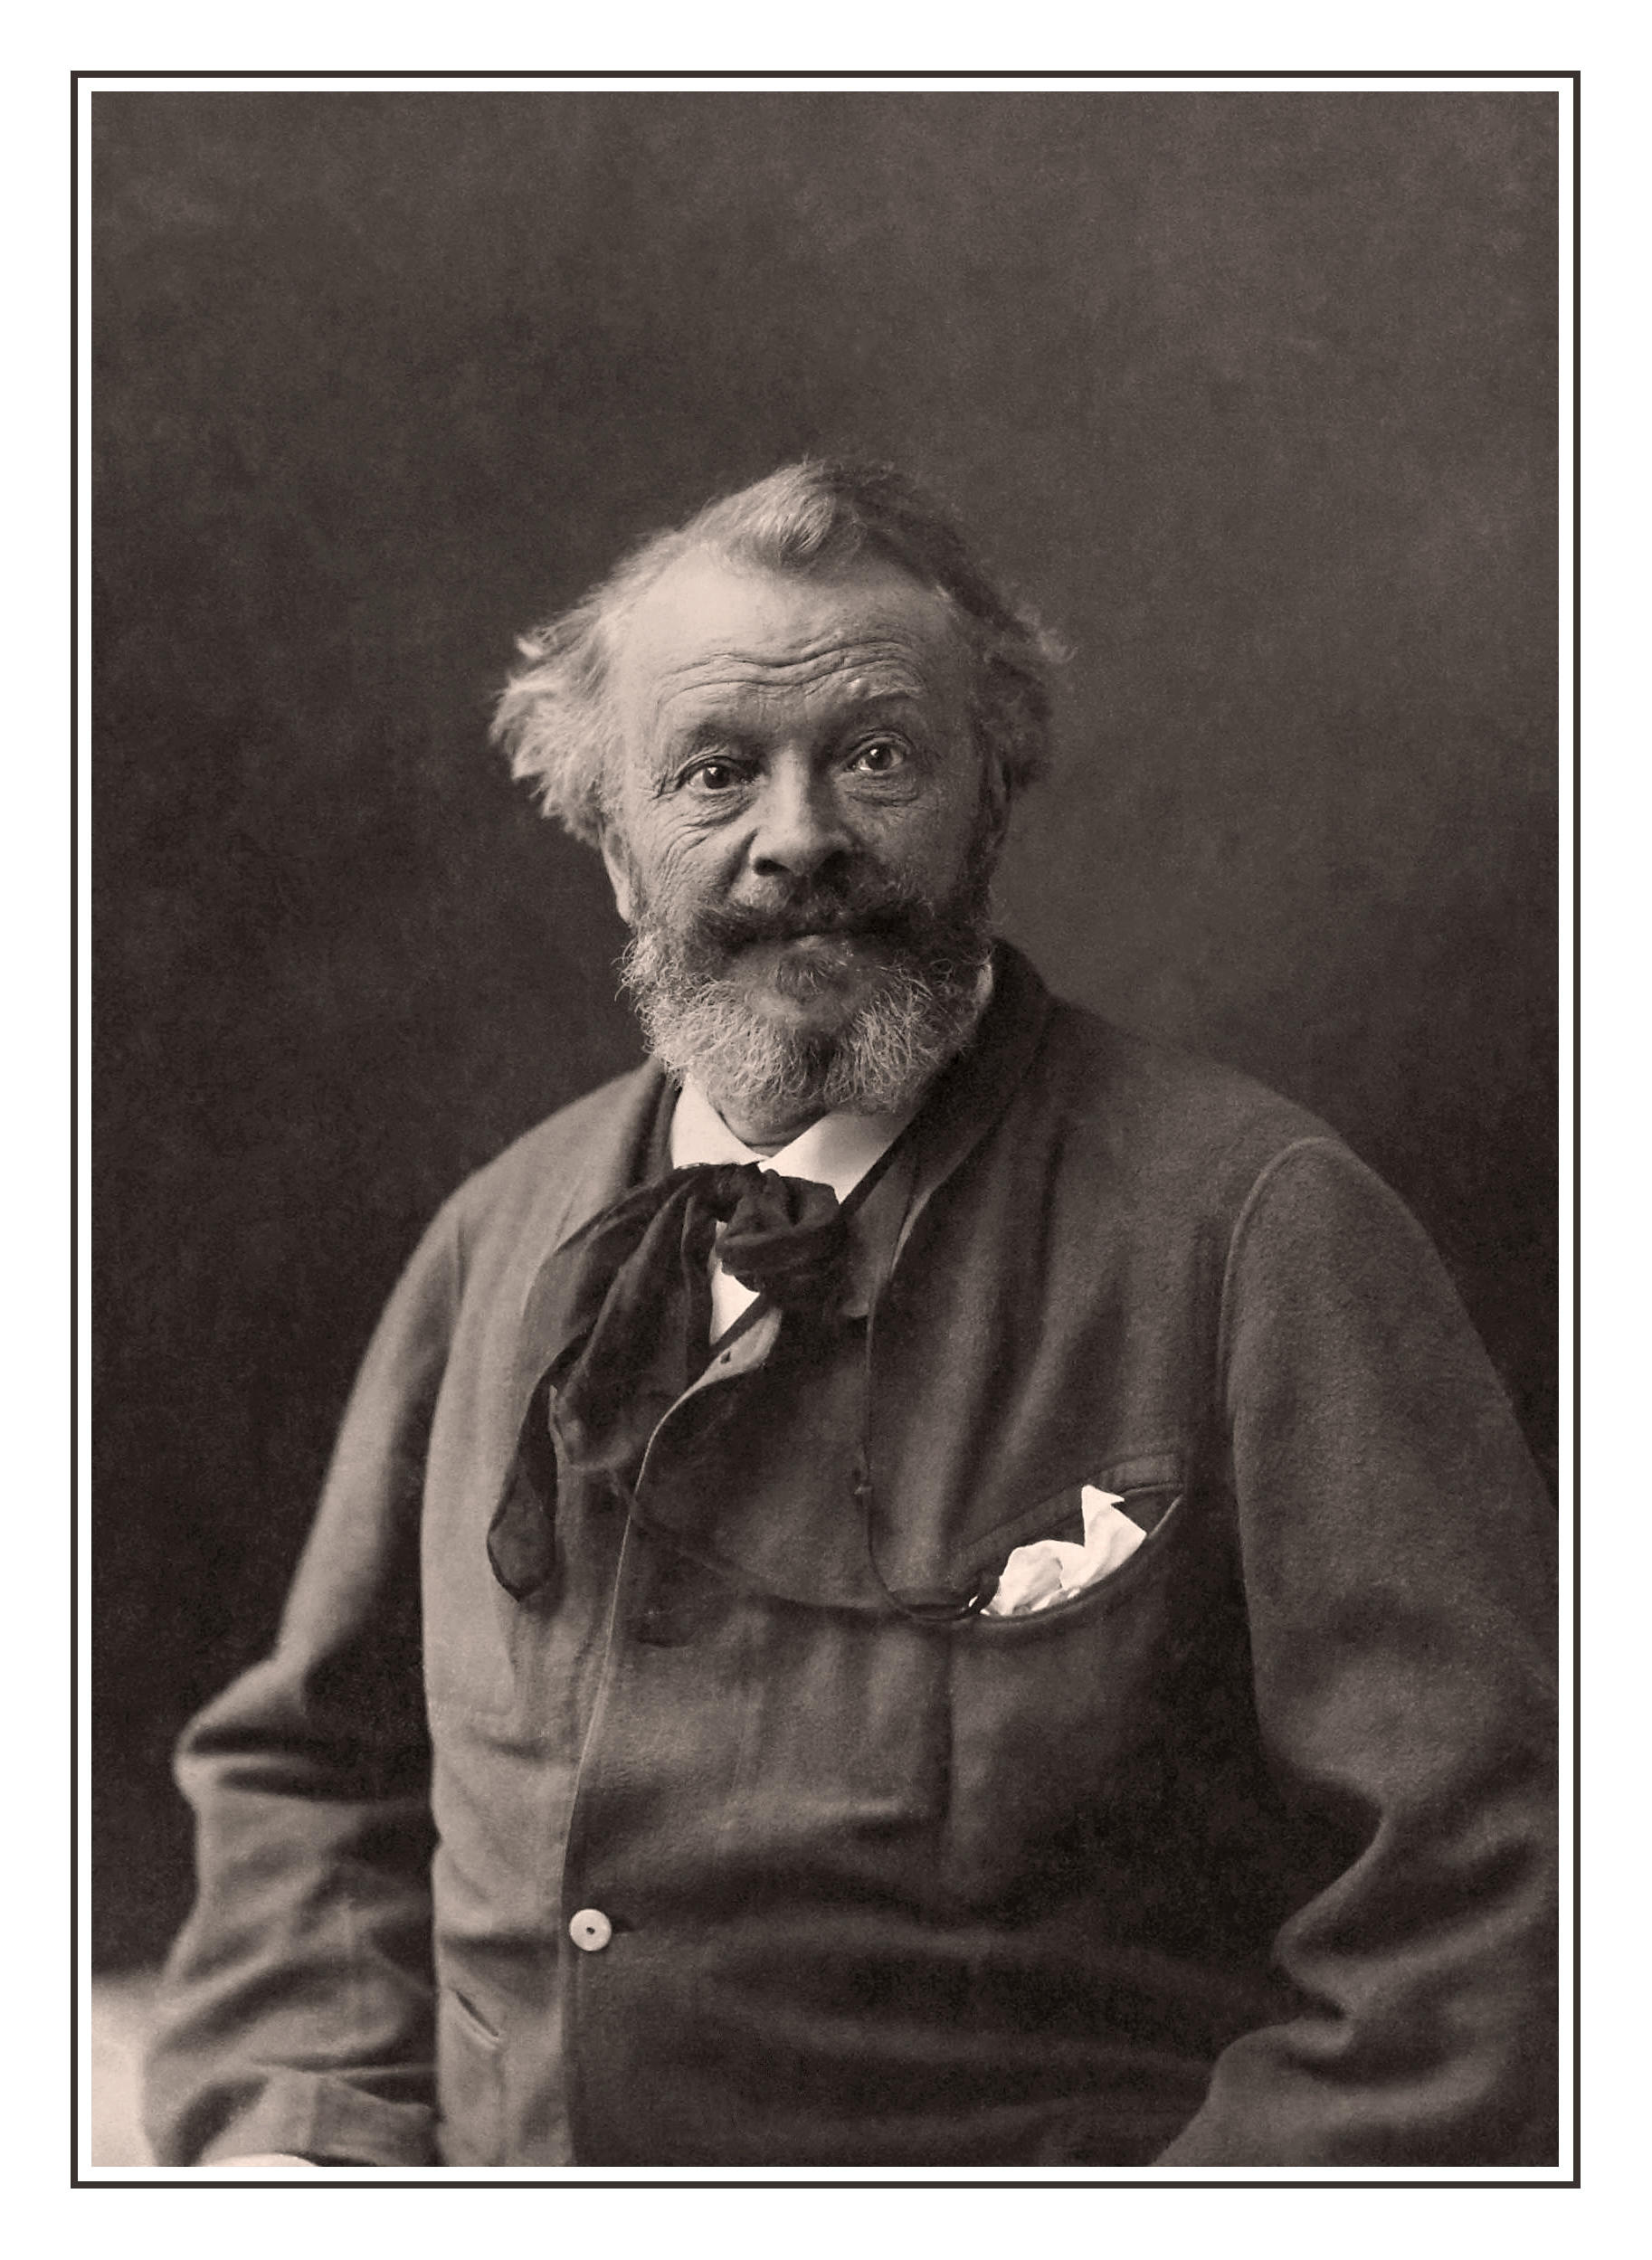 NADAR PHOTOGRAPHER FRANCE STUDIO PORTRAIT Gaspard-Felix Tournachon (6 April 1820 ? 20 March 1910, known by the pseudonym Nadar, was a French photographer, caricaturist, journalist, novelist, and balloonist (or, more accurately, proponent of manned flight)